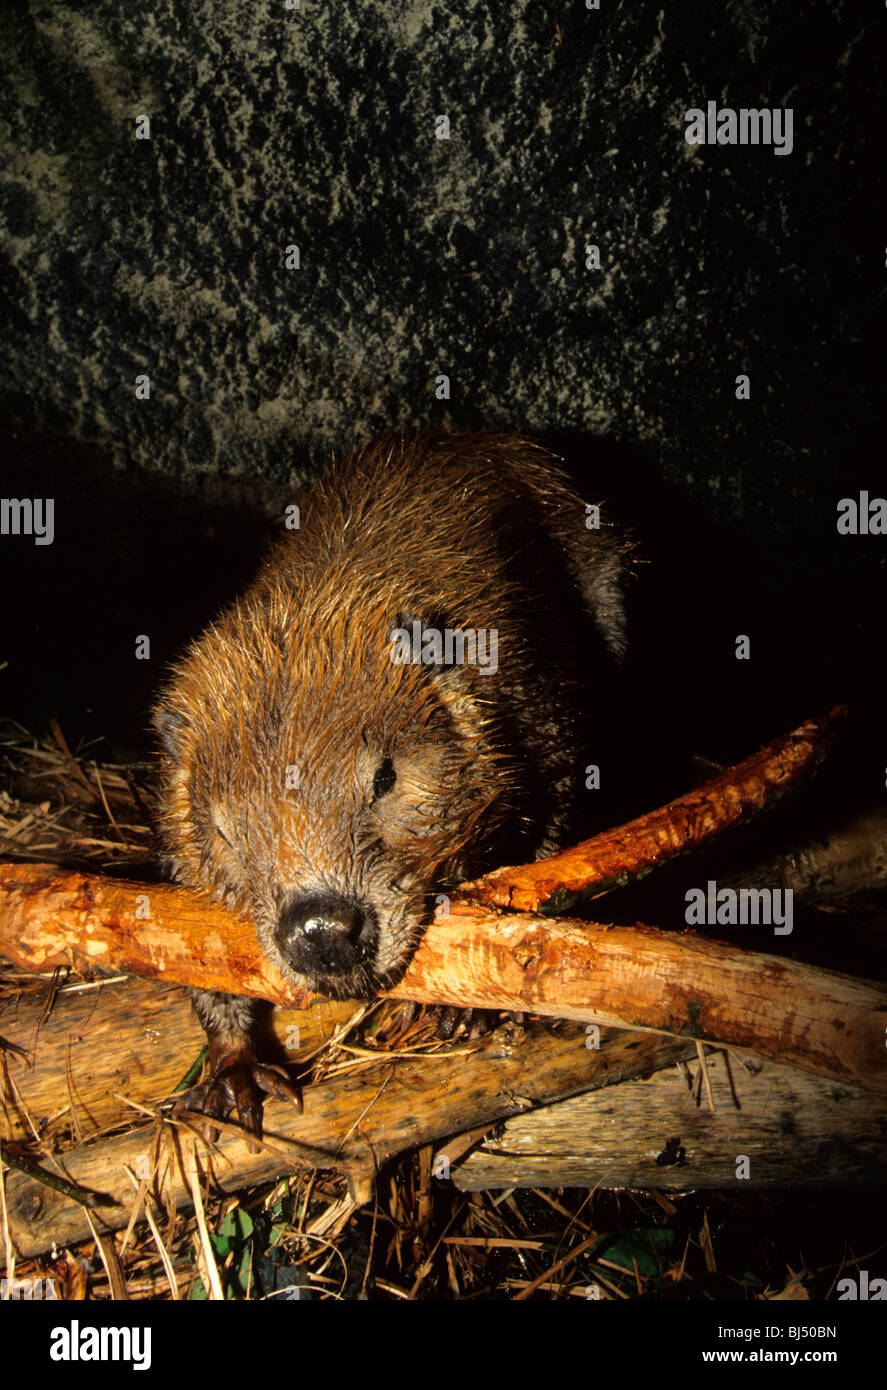 American Beaver (Castor canadensis) with wood in mouth Stock Photo